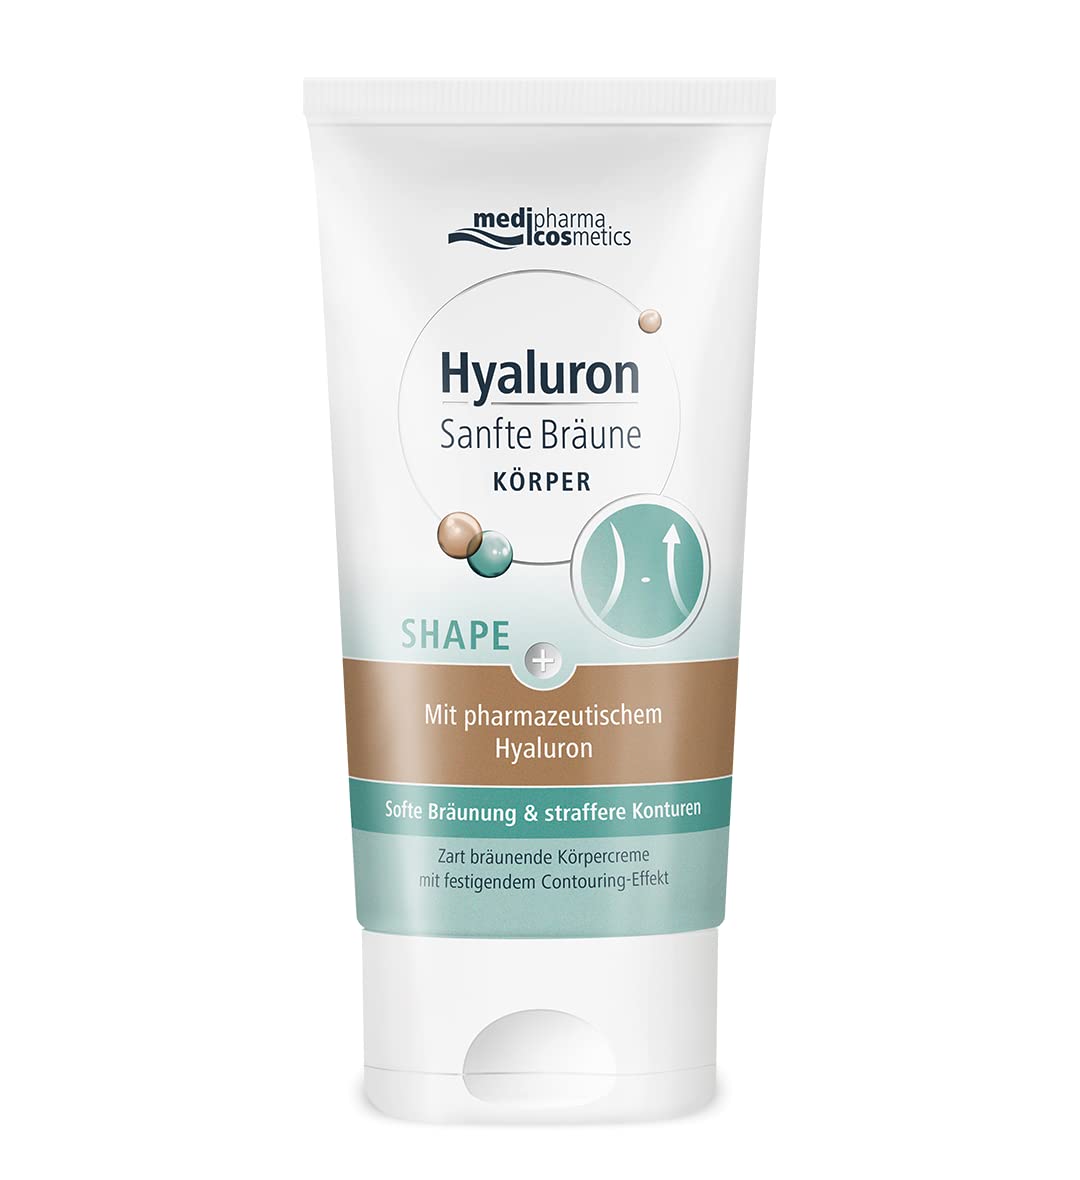 medipharma cosmetics Hyaluronic Gentle Tan Shape 150 ML, 2-in-1 Body Care for Firmer Contours and Beautiful Tan with ONLY ONE Product, Even with Cellulite, Targeted Against Dents and Labby Skin, ‎weiß